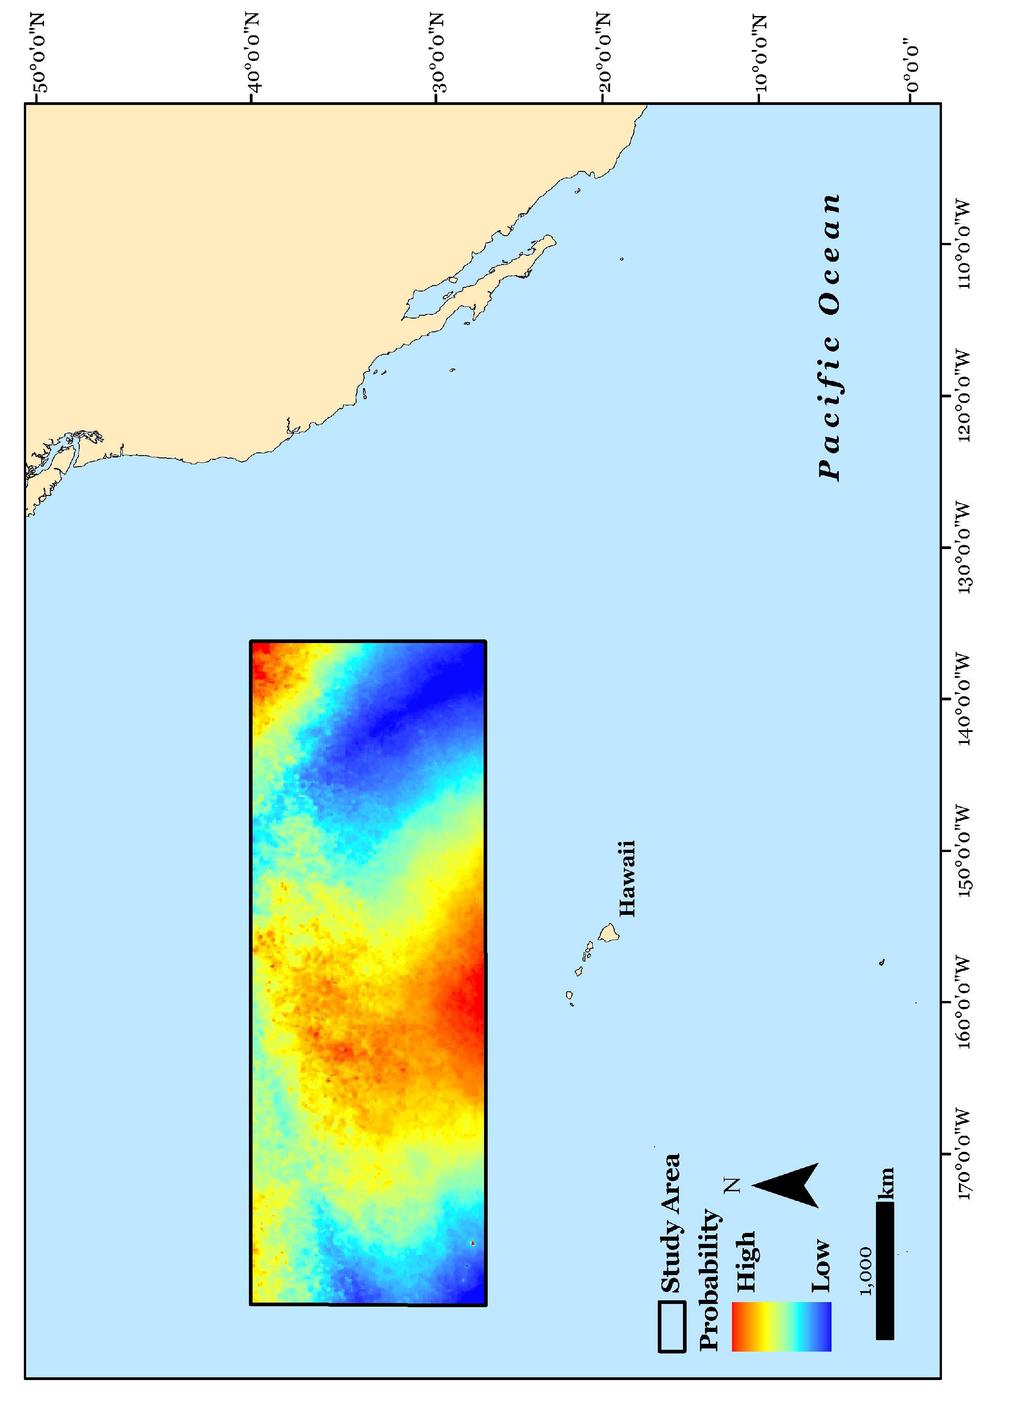 Figure 15: Probability of bycatch of loggerheads in pelagic longline swordfish gear in January within the North Pacific